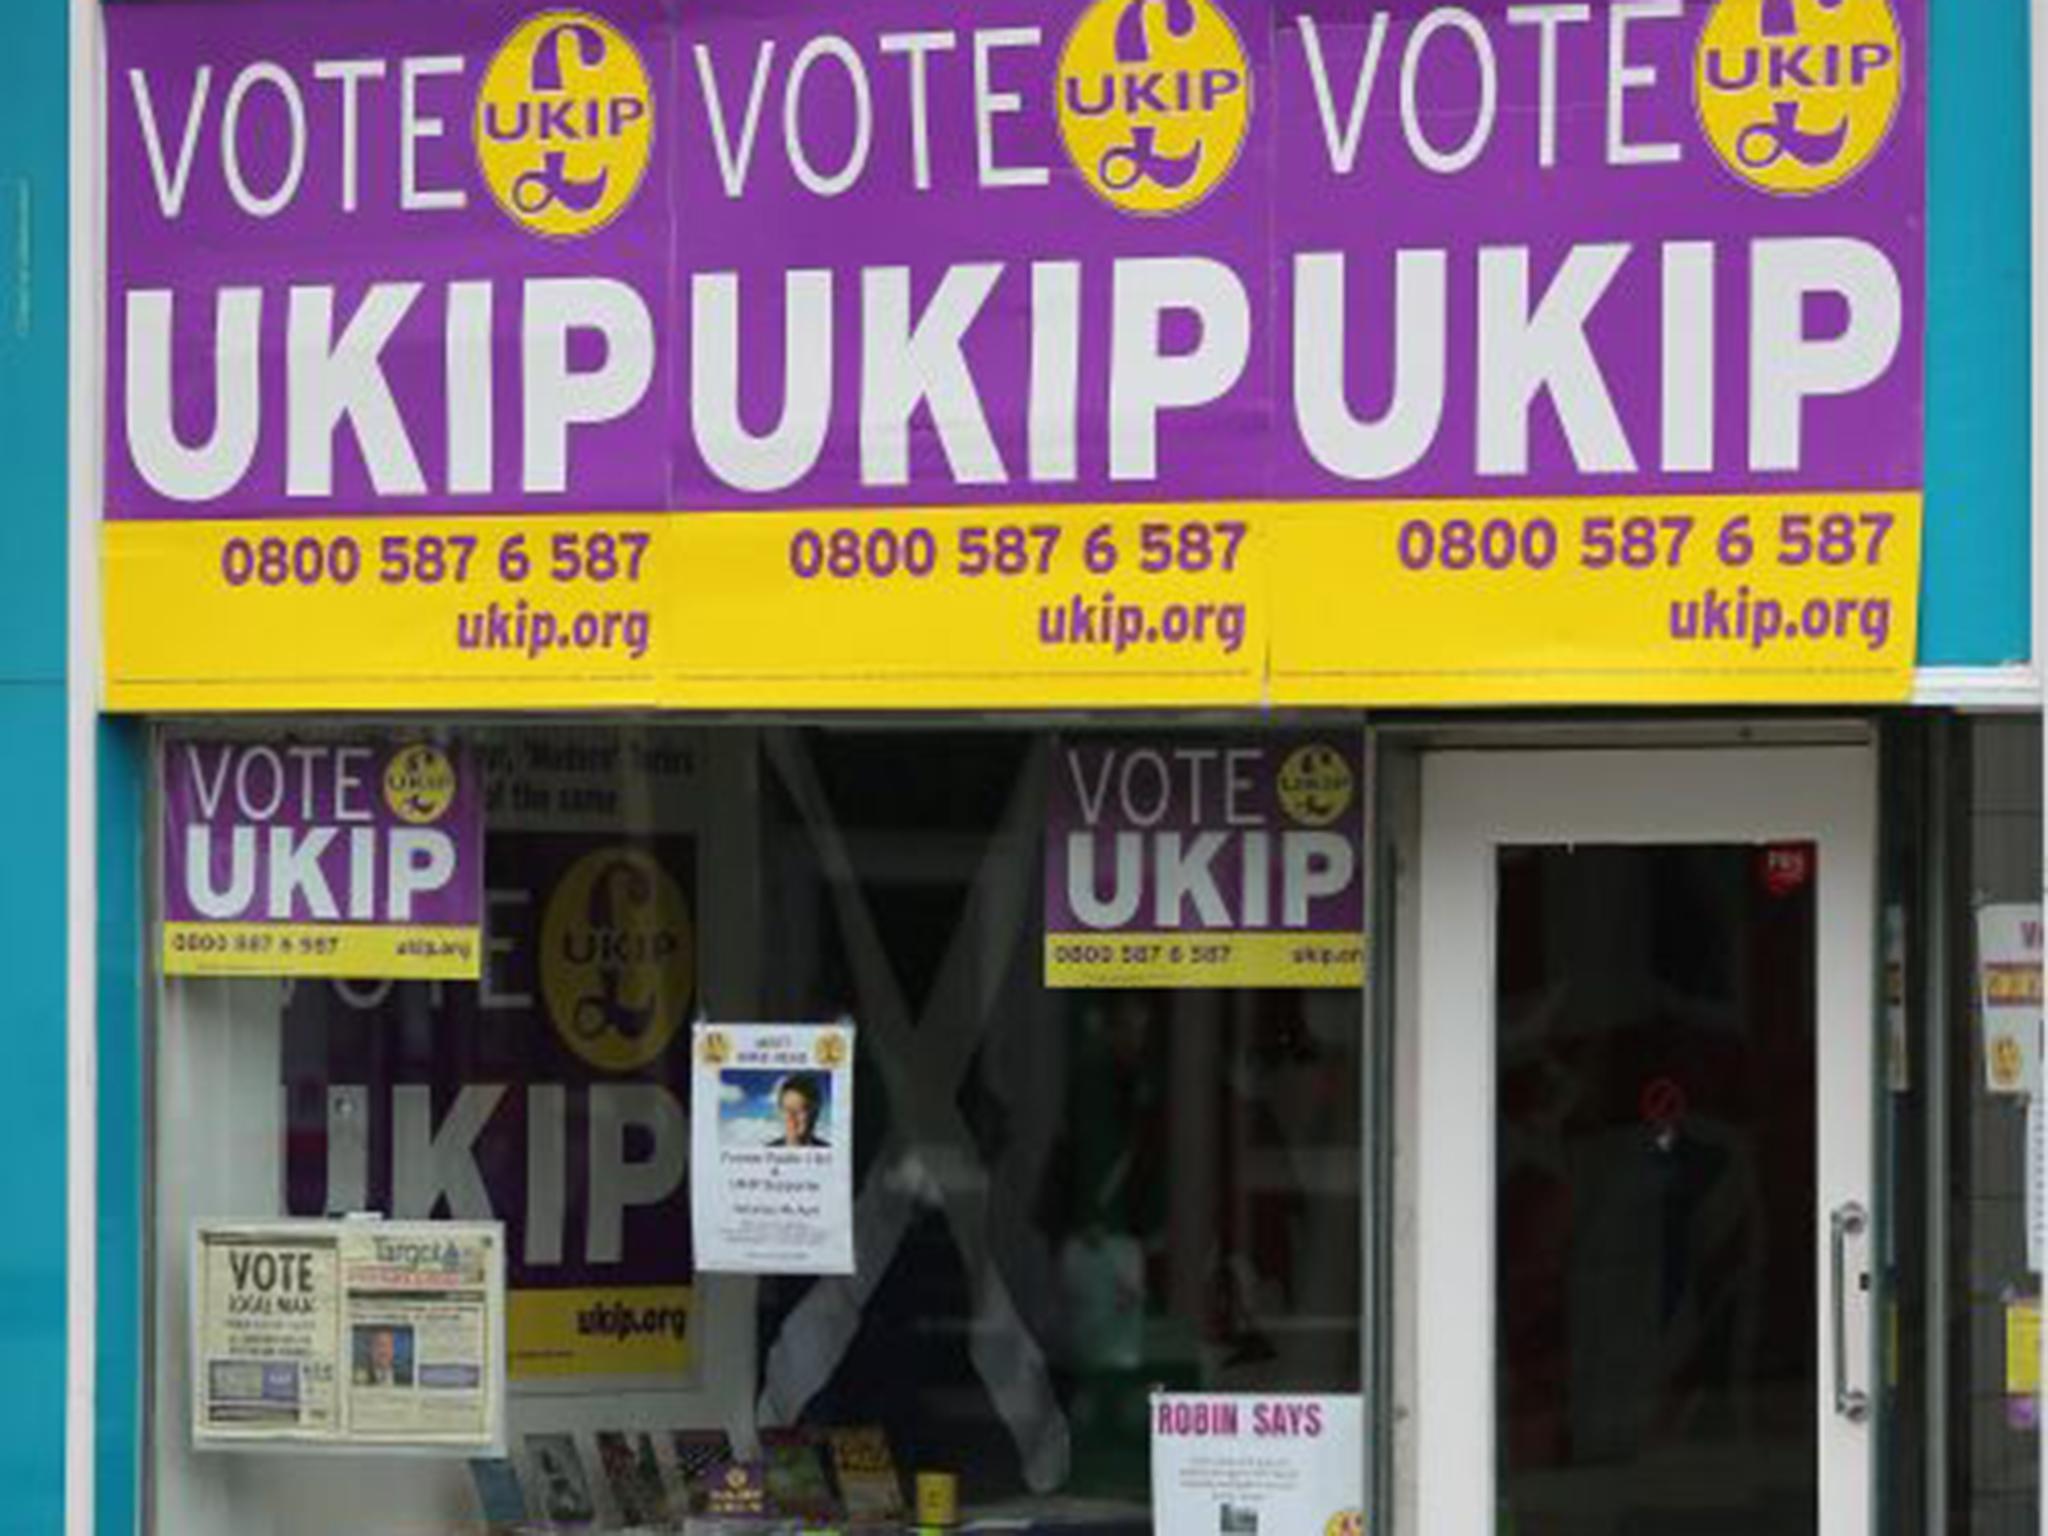 Ukip’s HQ in Boston, where the party has been gaining ground here since 2012